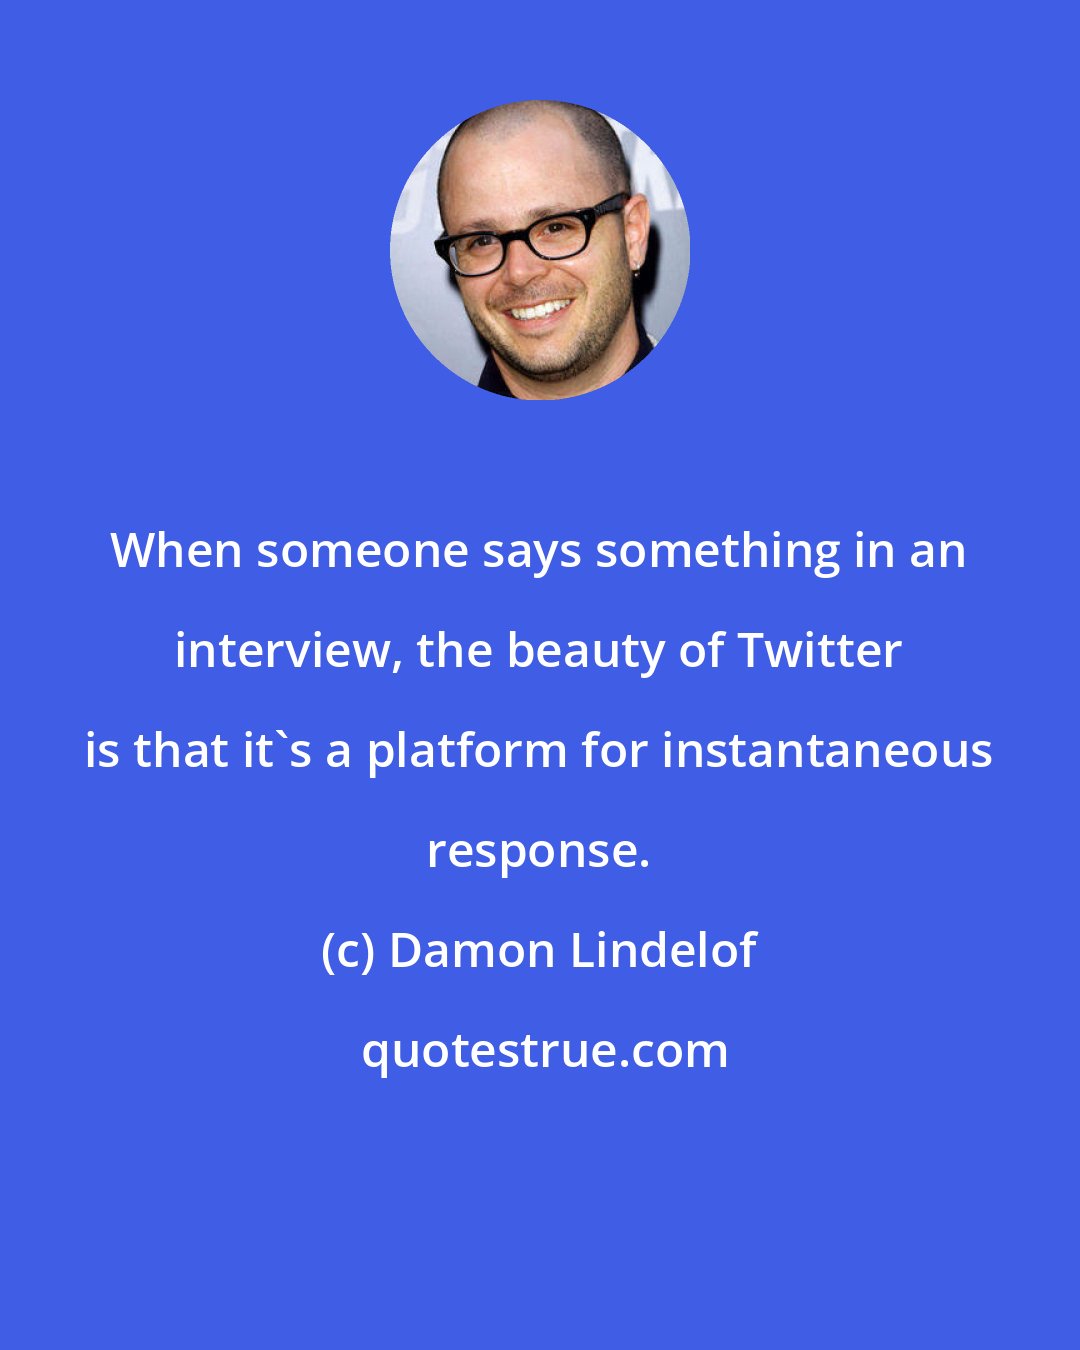 Damon Lindelof: When someone says something in an interview, the beauty of Twitter is that it's a platform for instantaneous response.